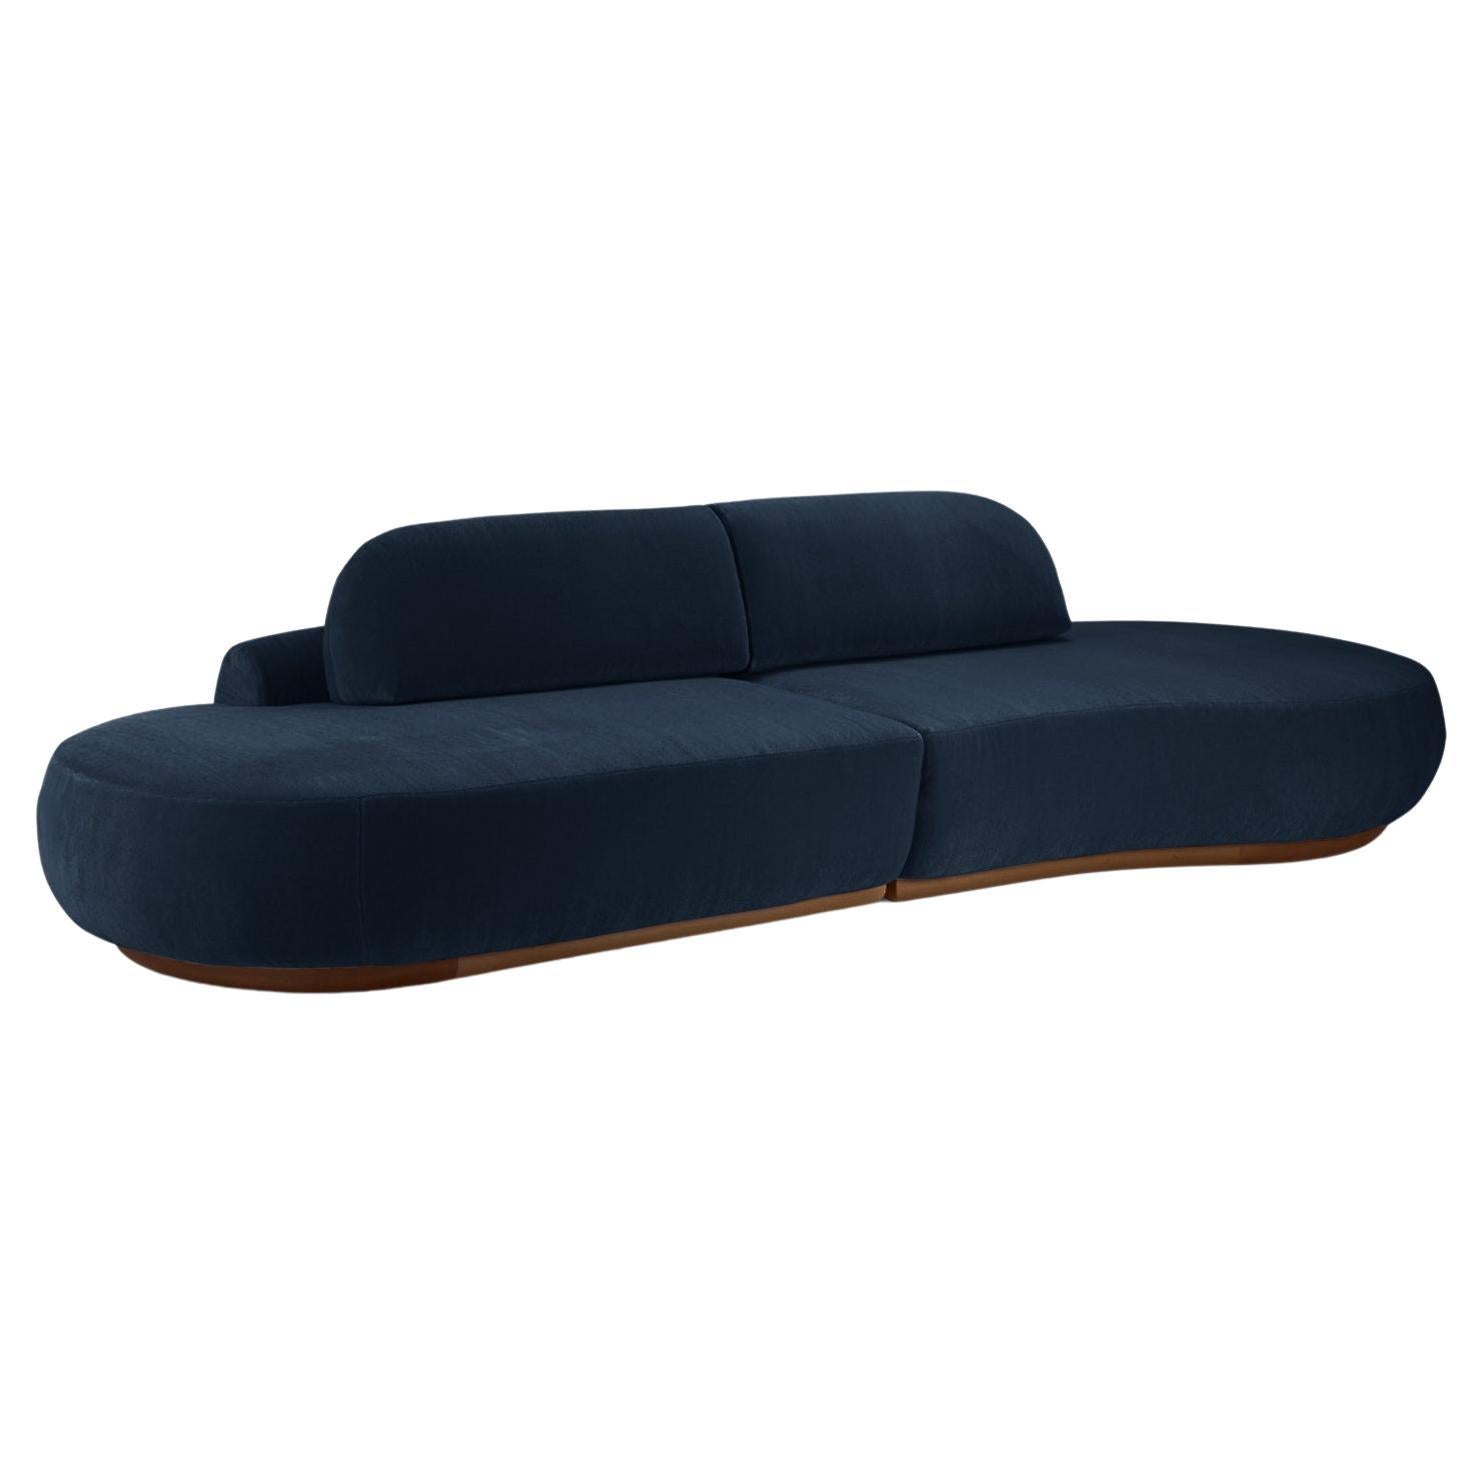 Naked Curved Sectional Sofa, 2 Piece with Beech Ash-056-1 and Paris Black